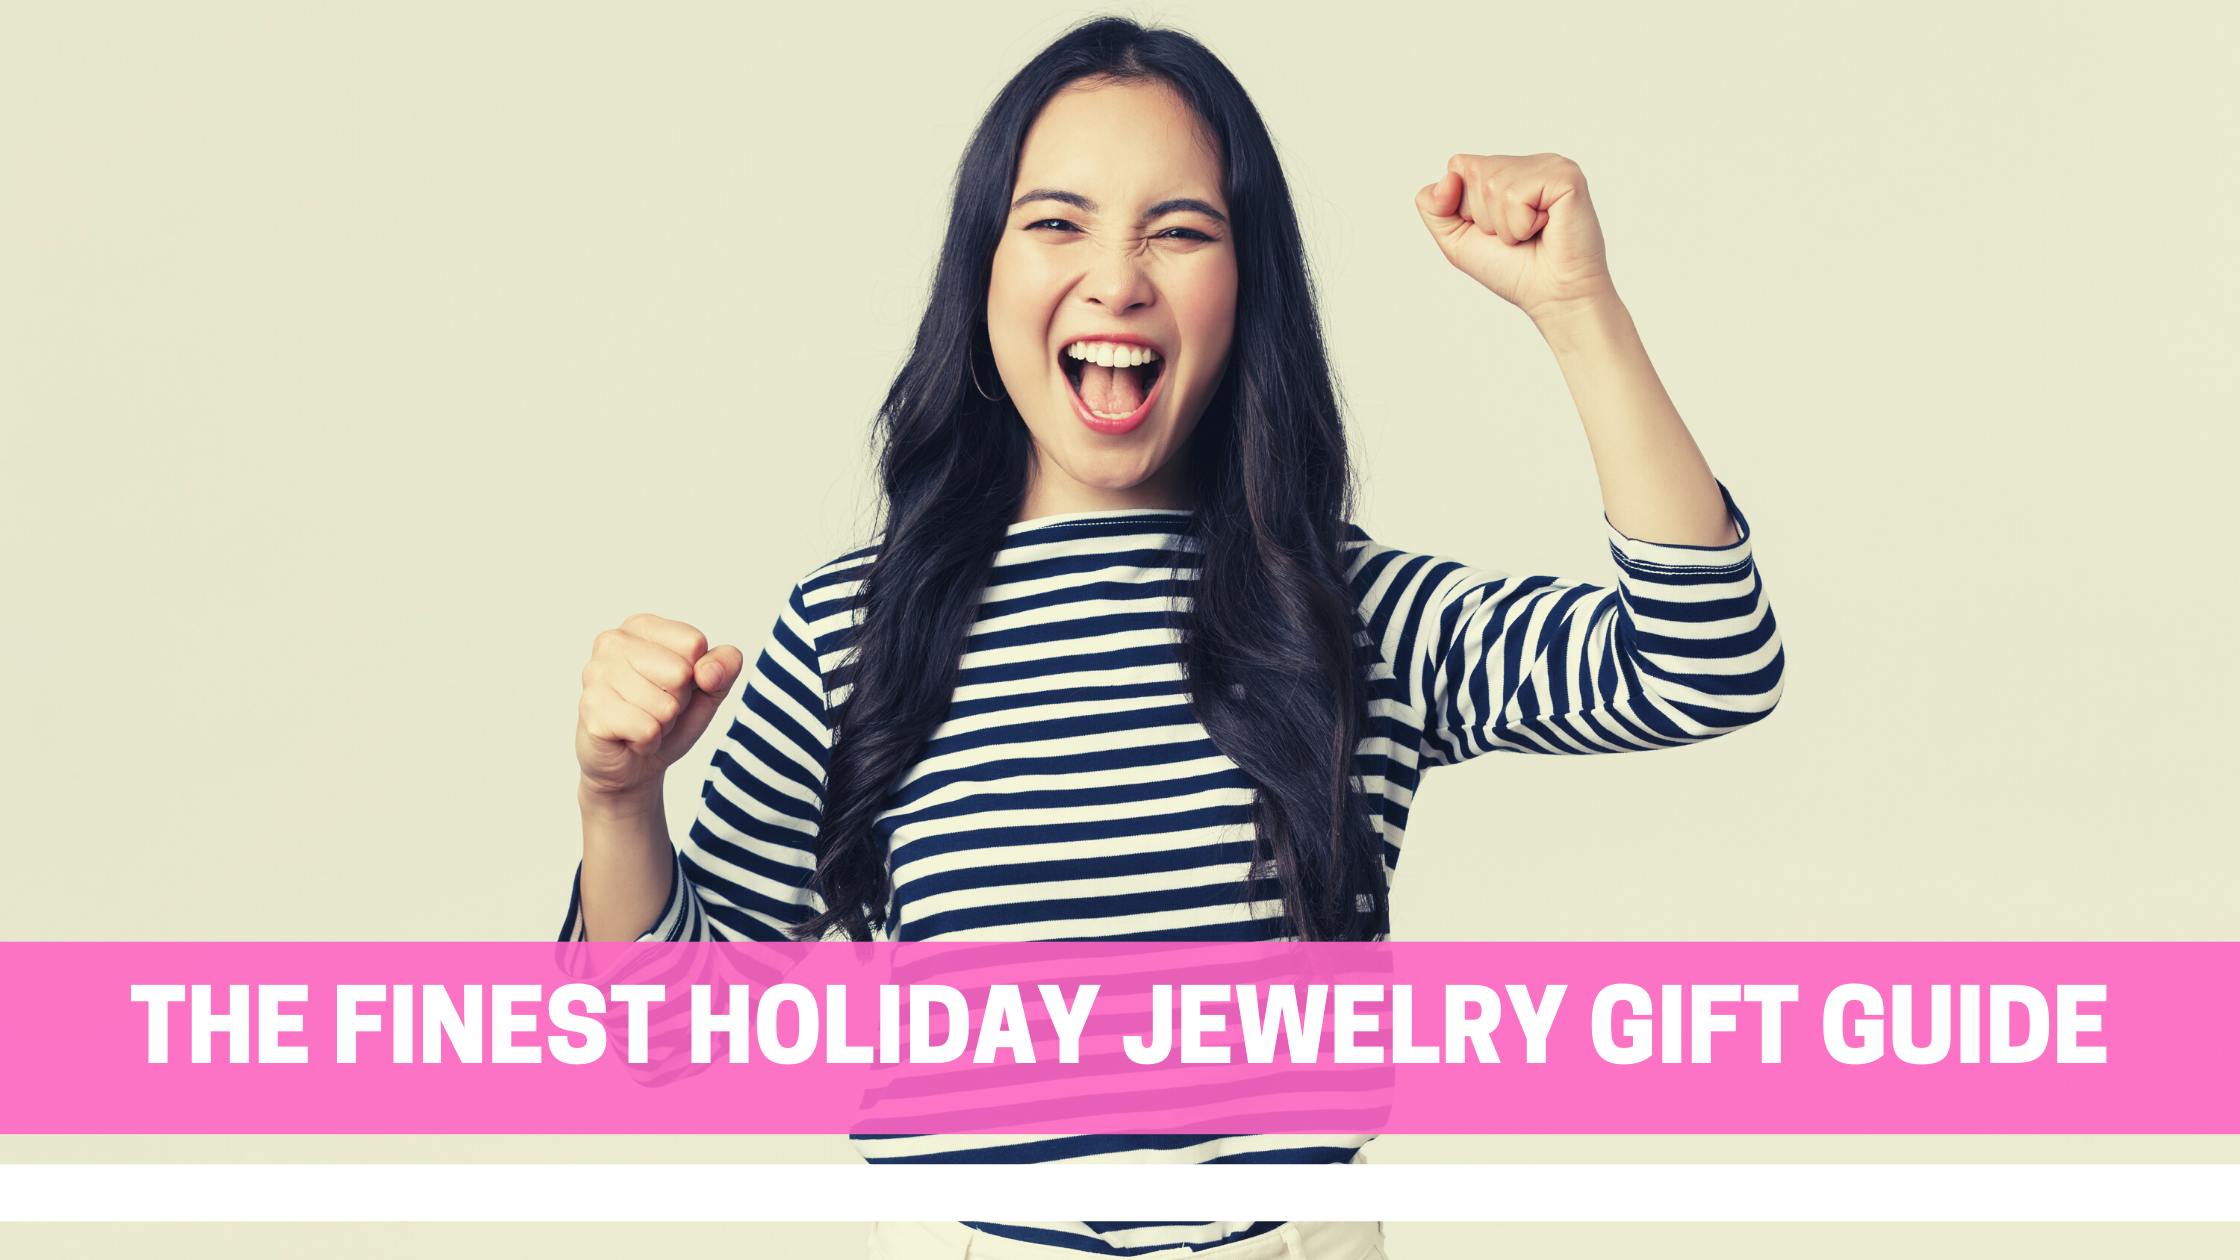 The Finest Holiday Jewelry Gift Guide